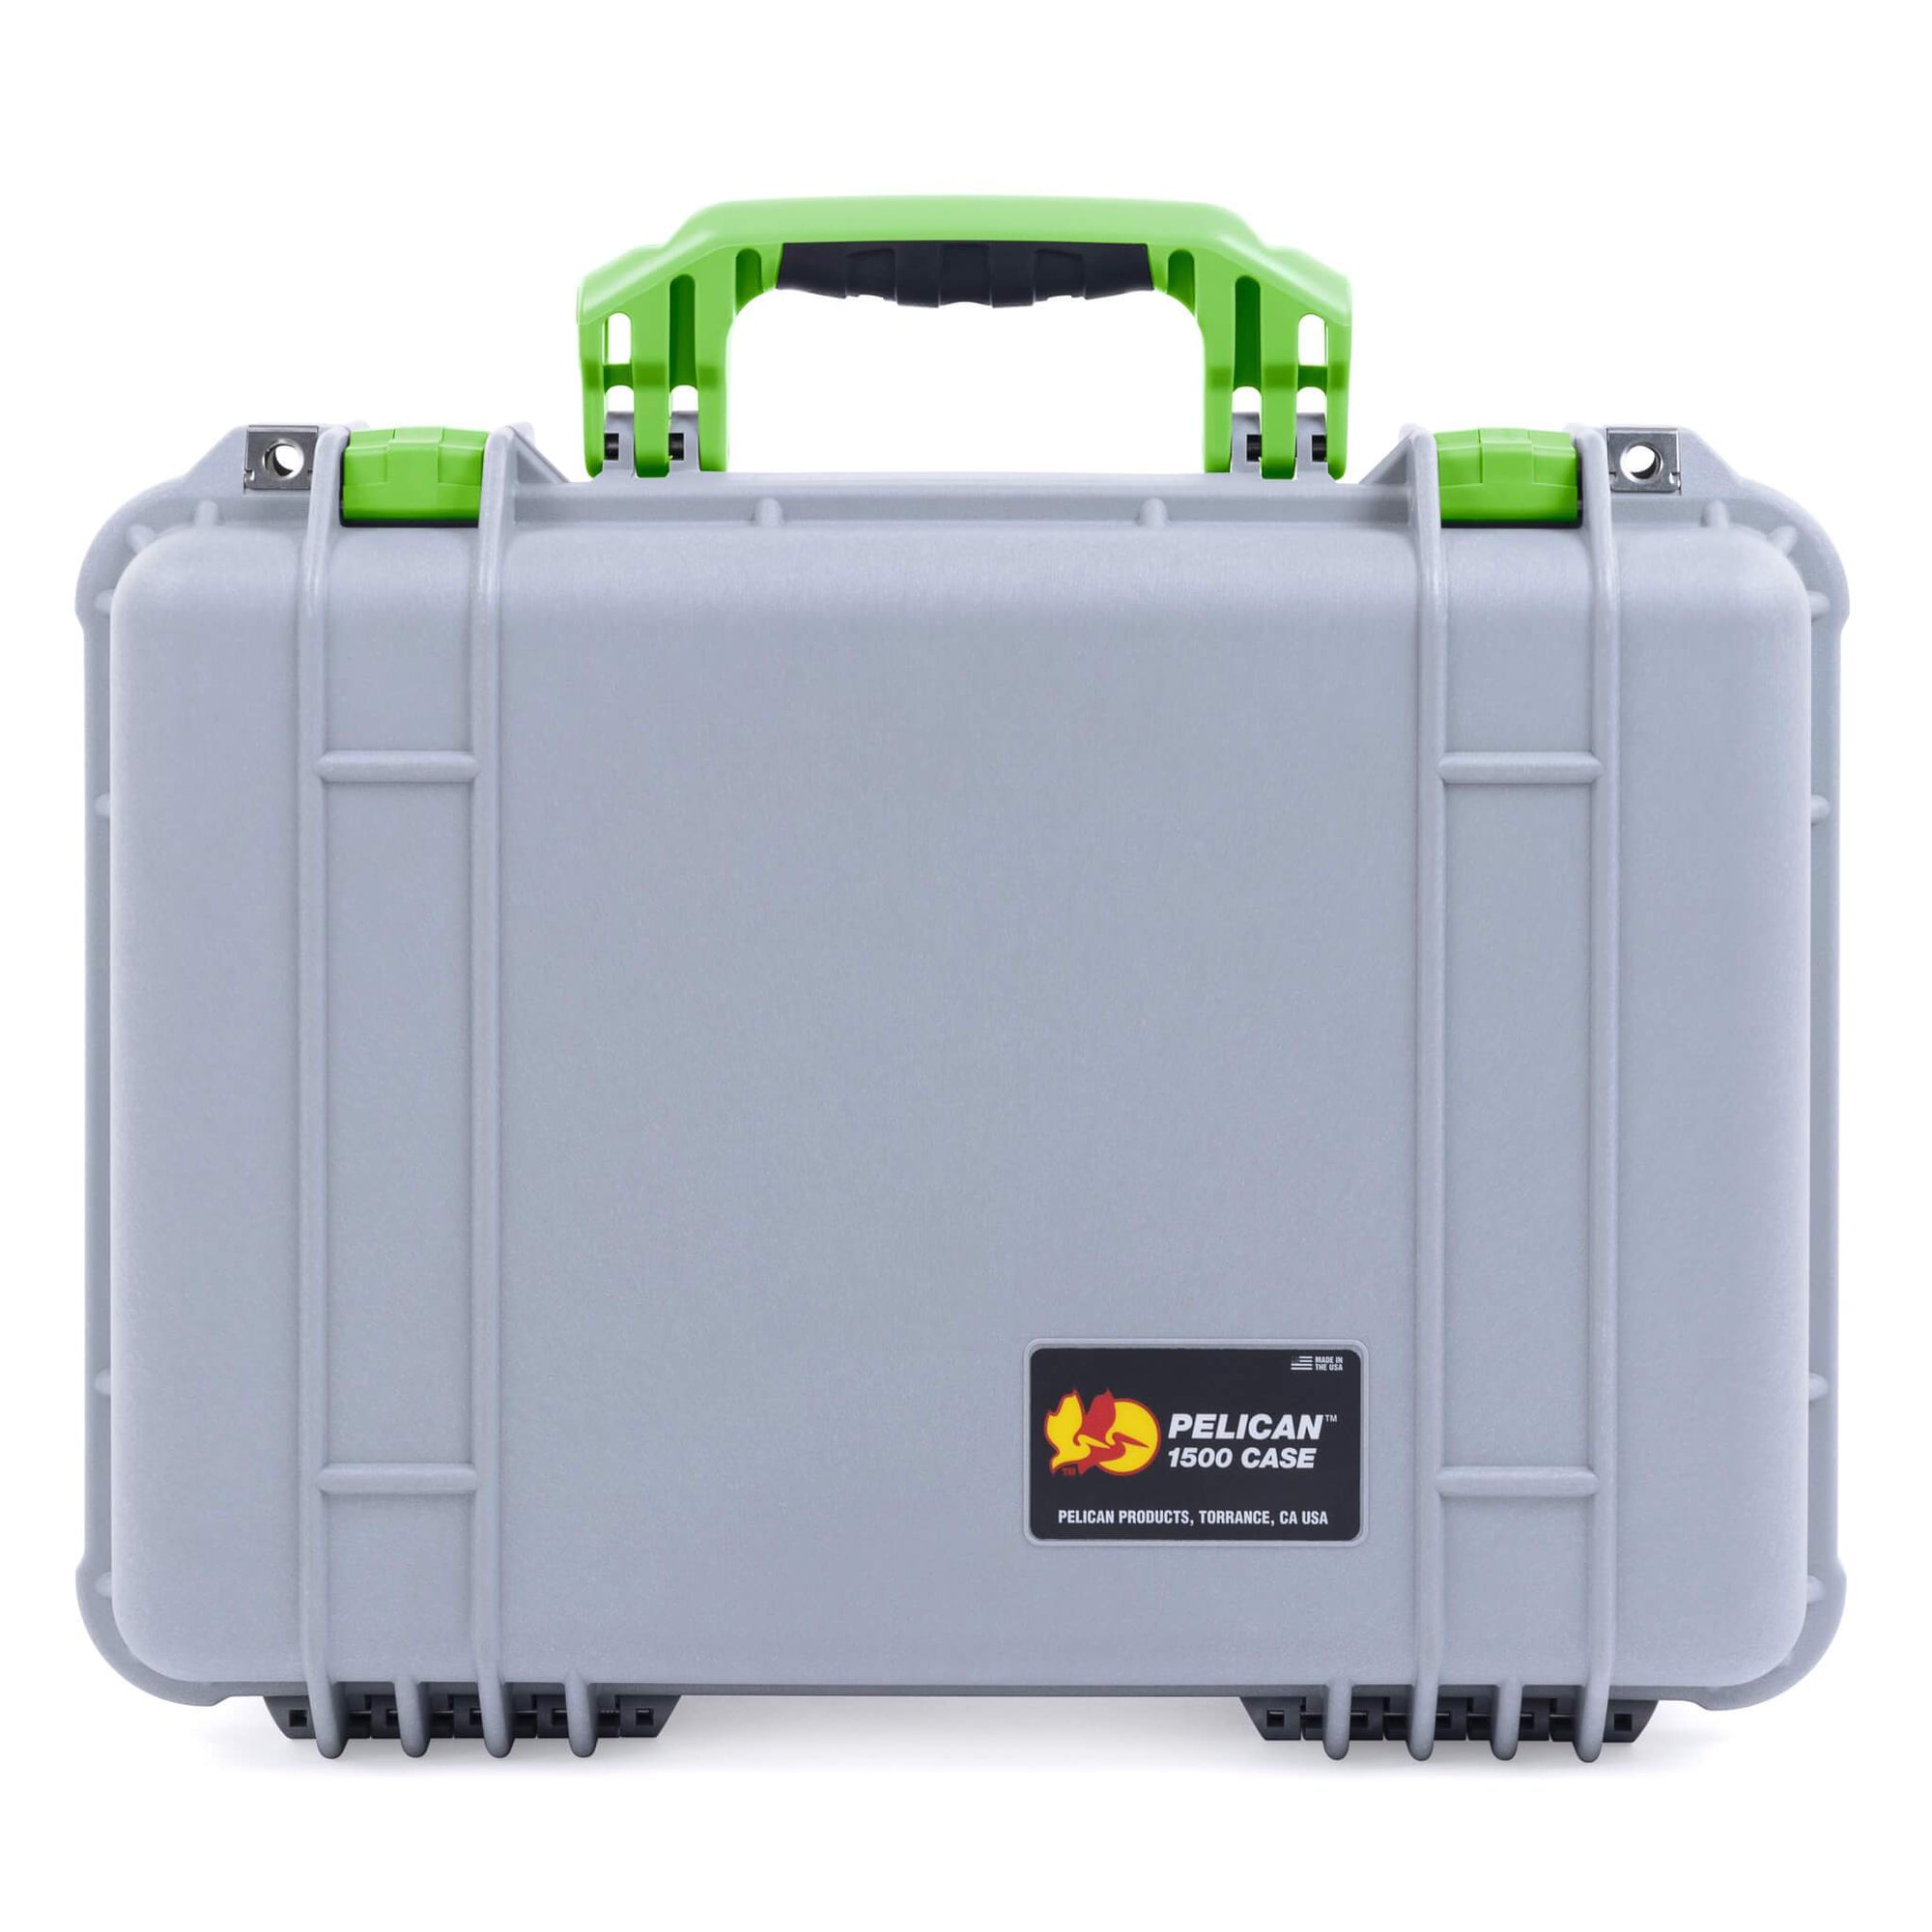 Pelican 1500 Case, Silver with Lime Green Handle & Latches ColorCase 